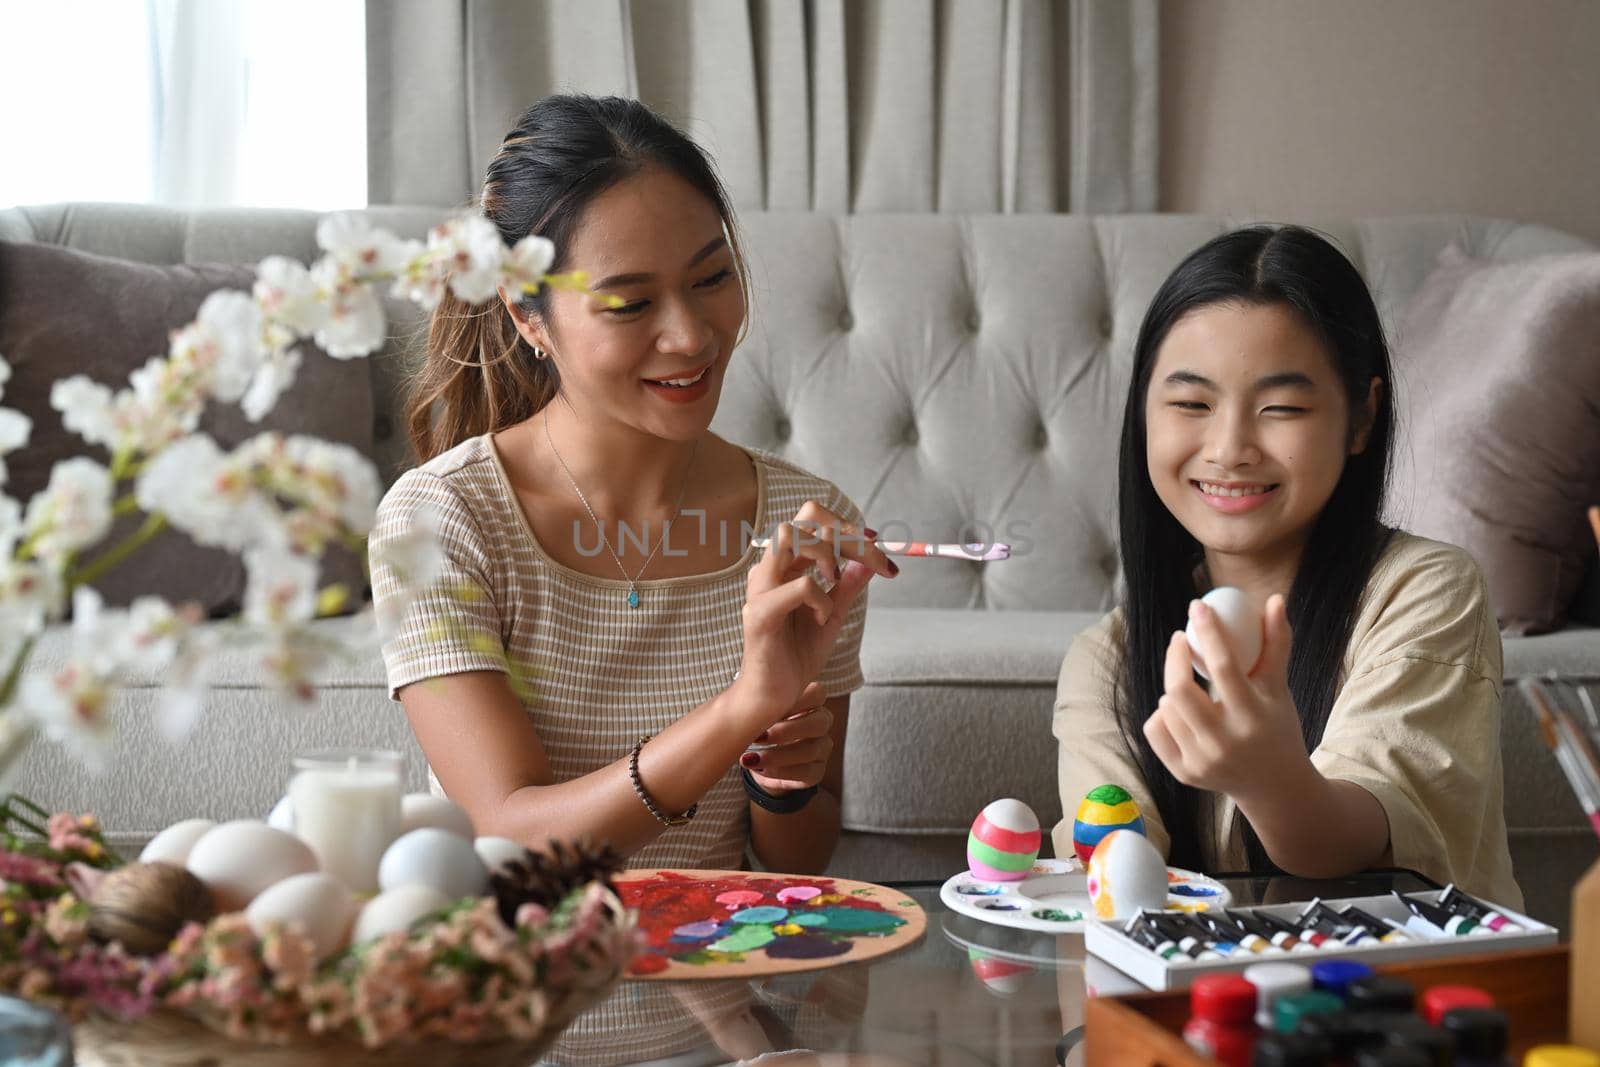 Mother and daughter are spending leisure time together before Easter while painting eggs.